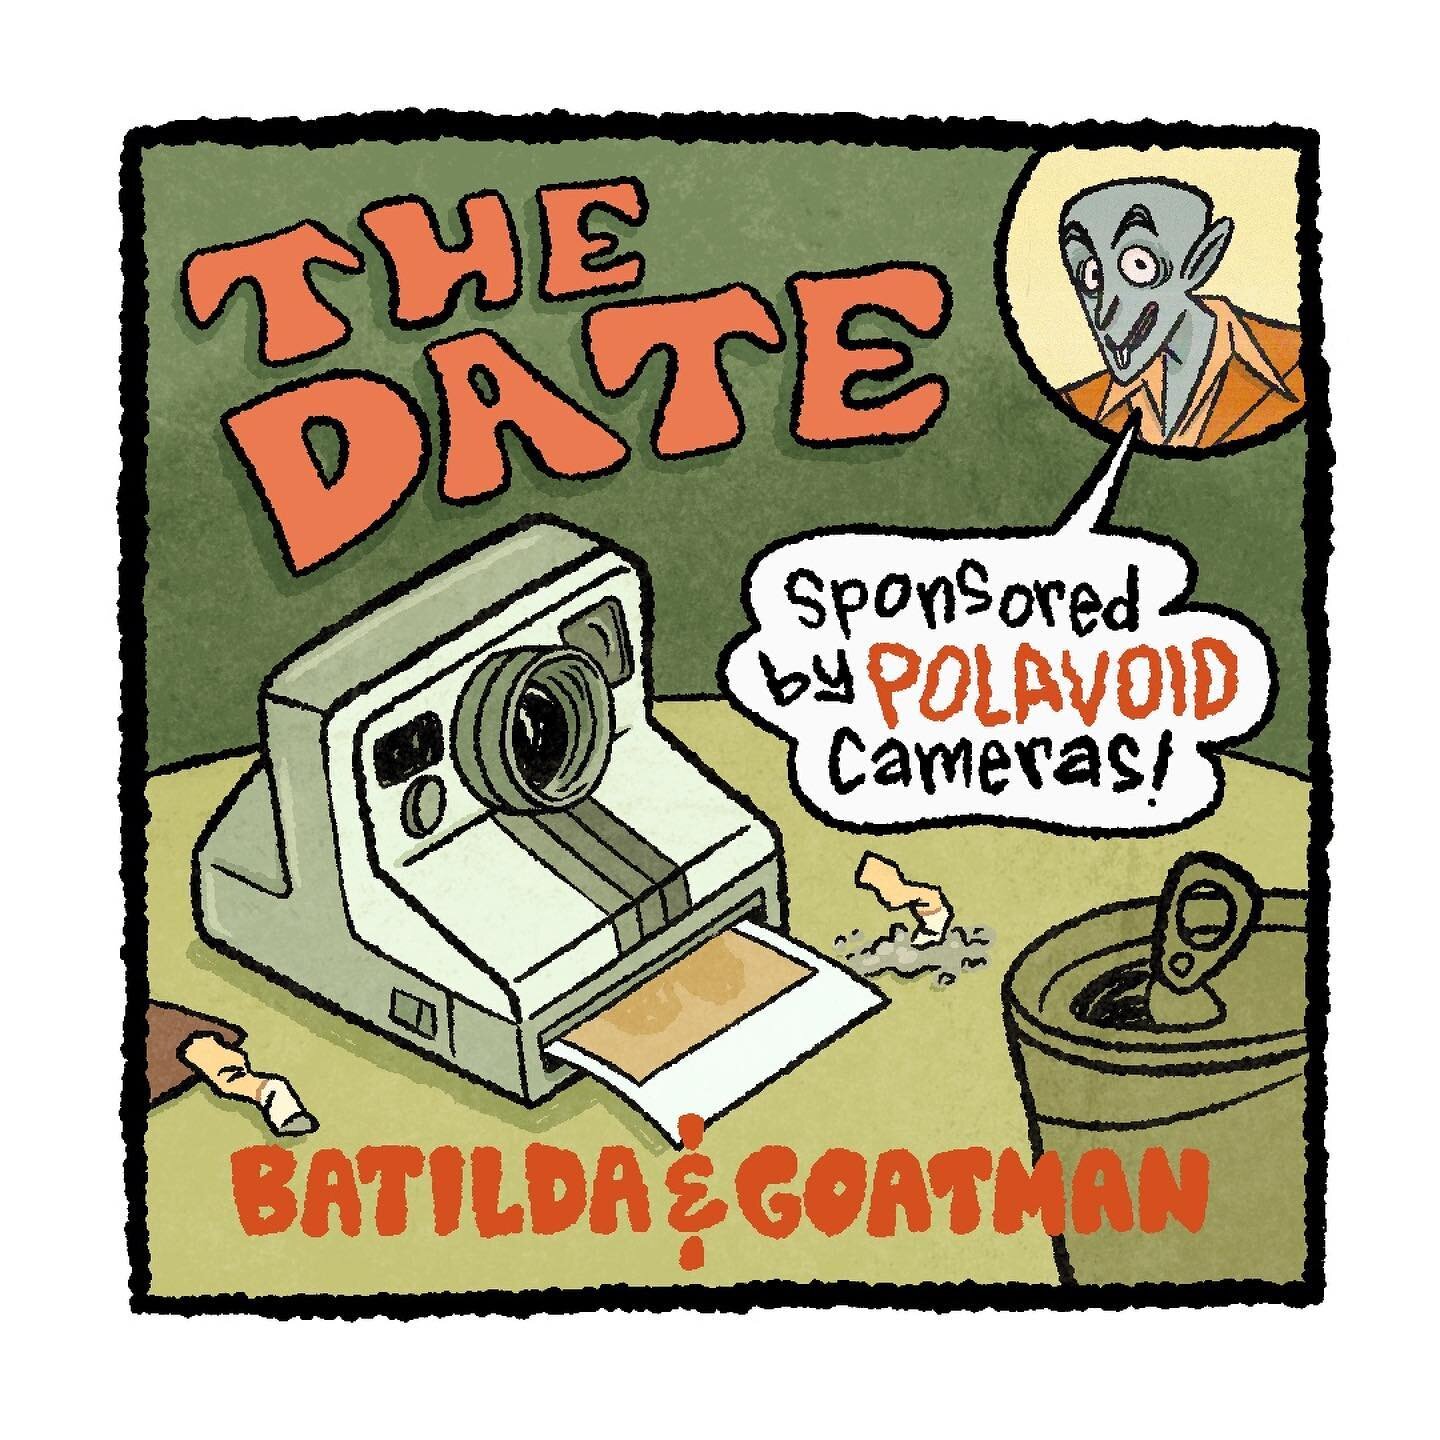 &ldquo;This date is brought to you by Polavoid Cameras! Polavoid, capturing sweet nothings since 1968.&rdquo;
.
.
I&rsquo;m still baffled by the results of Cryptid Cupid Episode 1. Somehow the enigmatic Goatman has charmed his way into your hearts. S